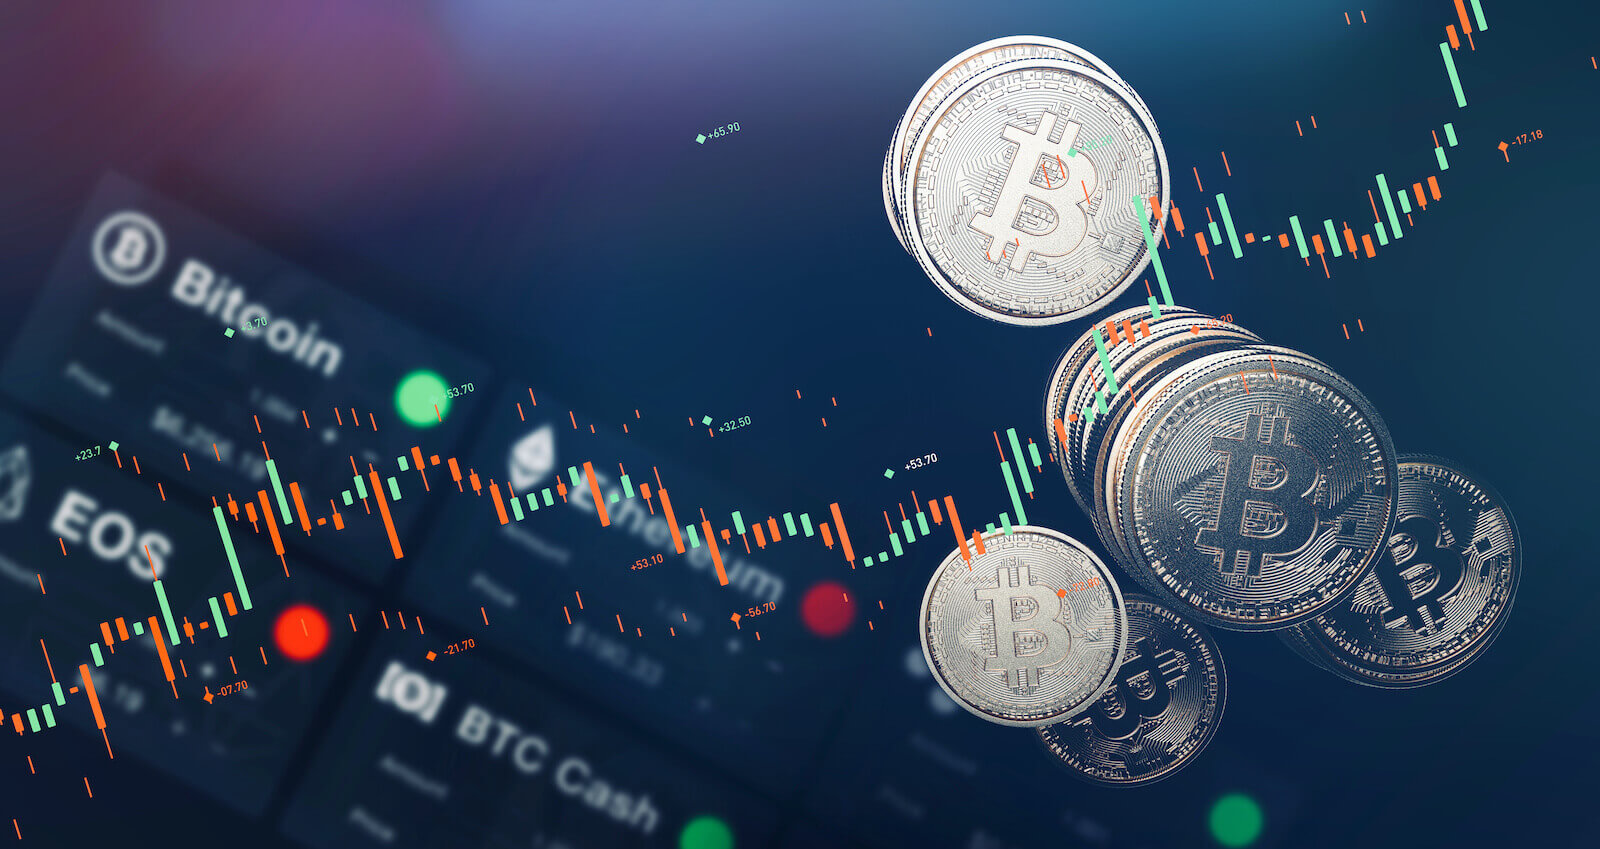 Cryptocurrency Prices in the Spotlight, Small Caps Now in an Uptrend | ChartWatchers